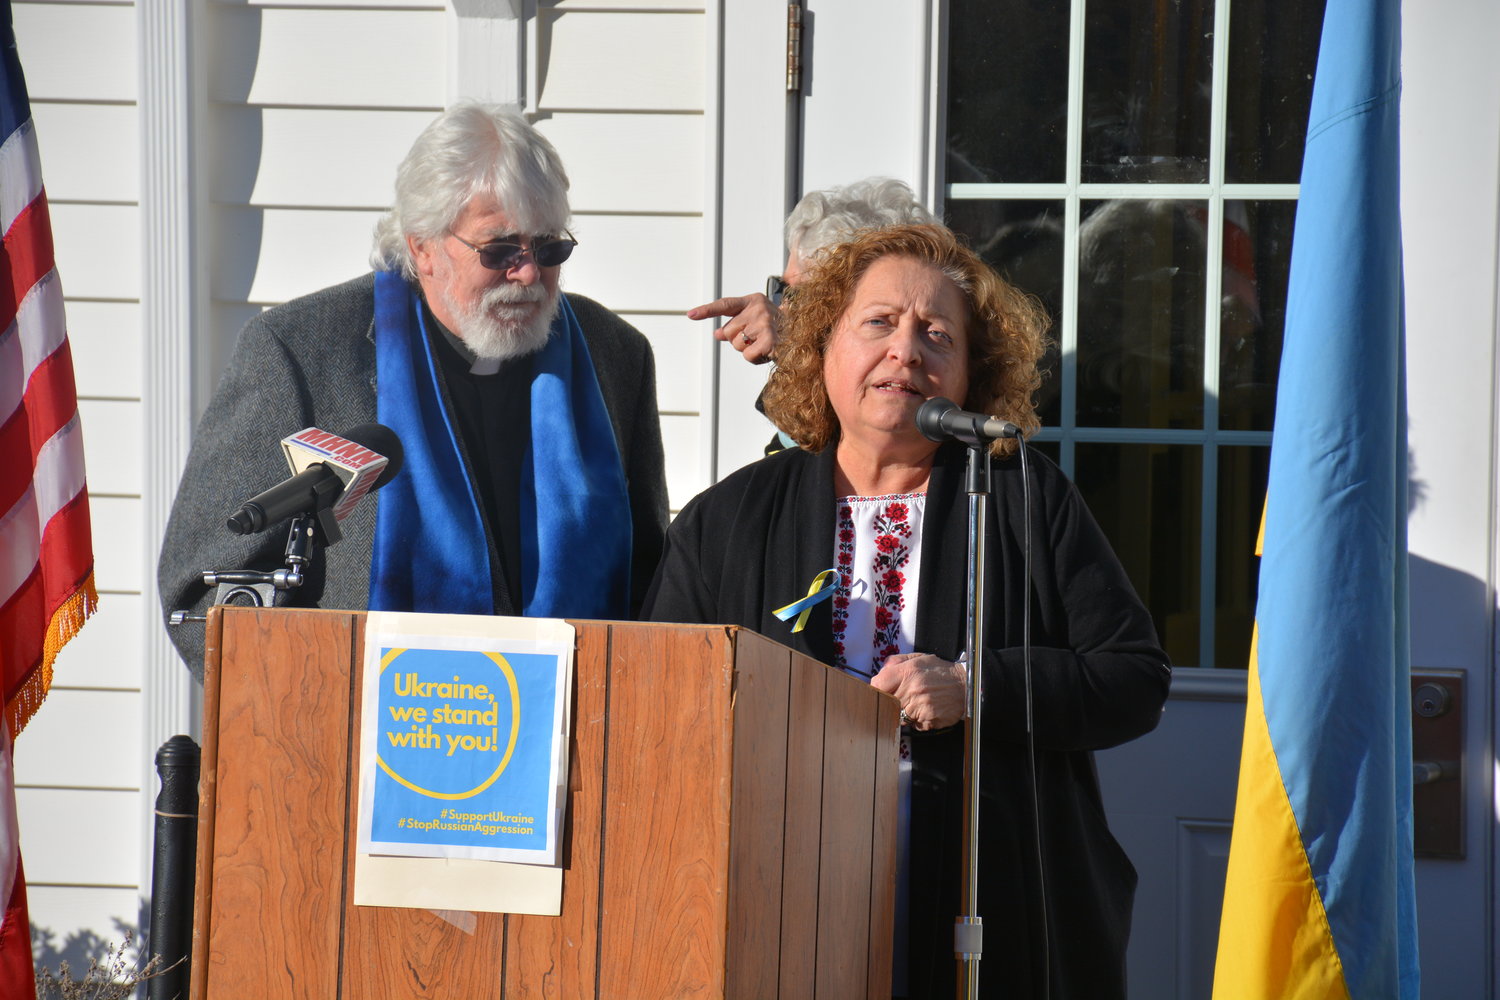 District 2 Legislator Nadia Rajsz, who is a member of the Ukrainian Congress Committee of America and president of the local branch of the Ukrainian National Women’s League of America, speaks to rally attendees. To her left is Pastor Bob Everett.